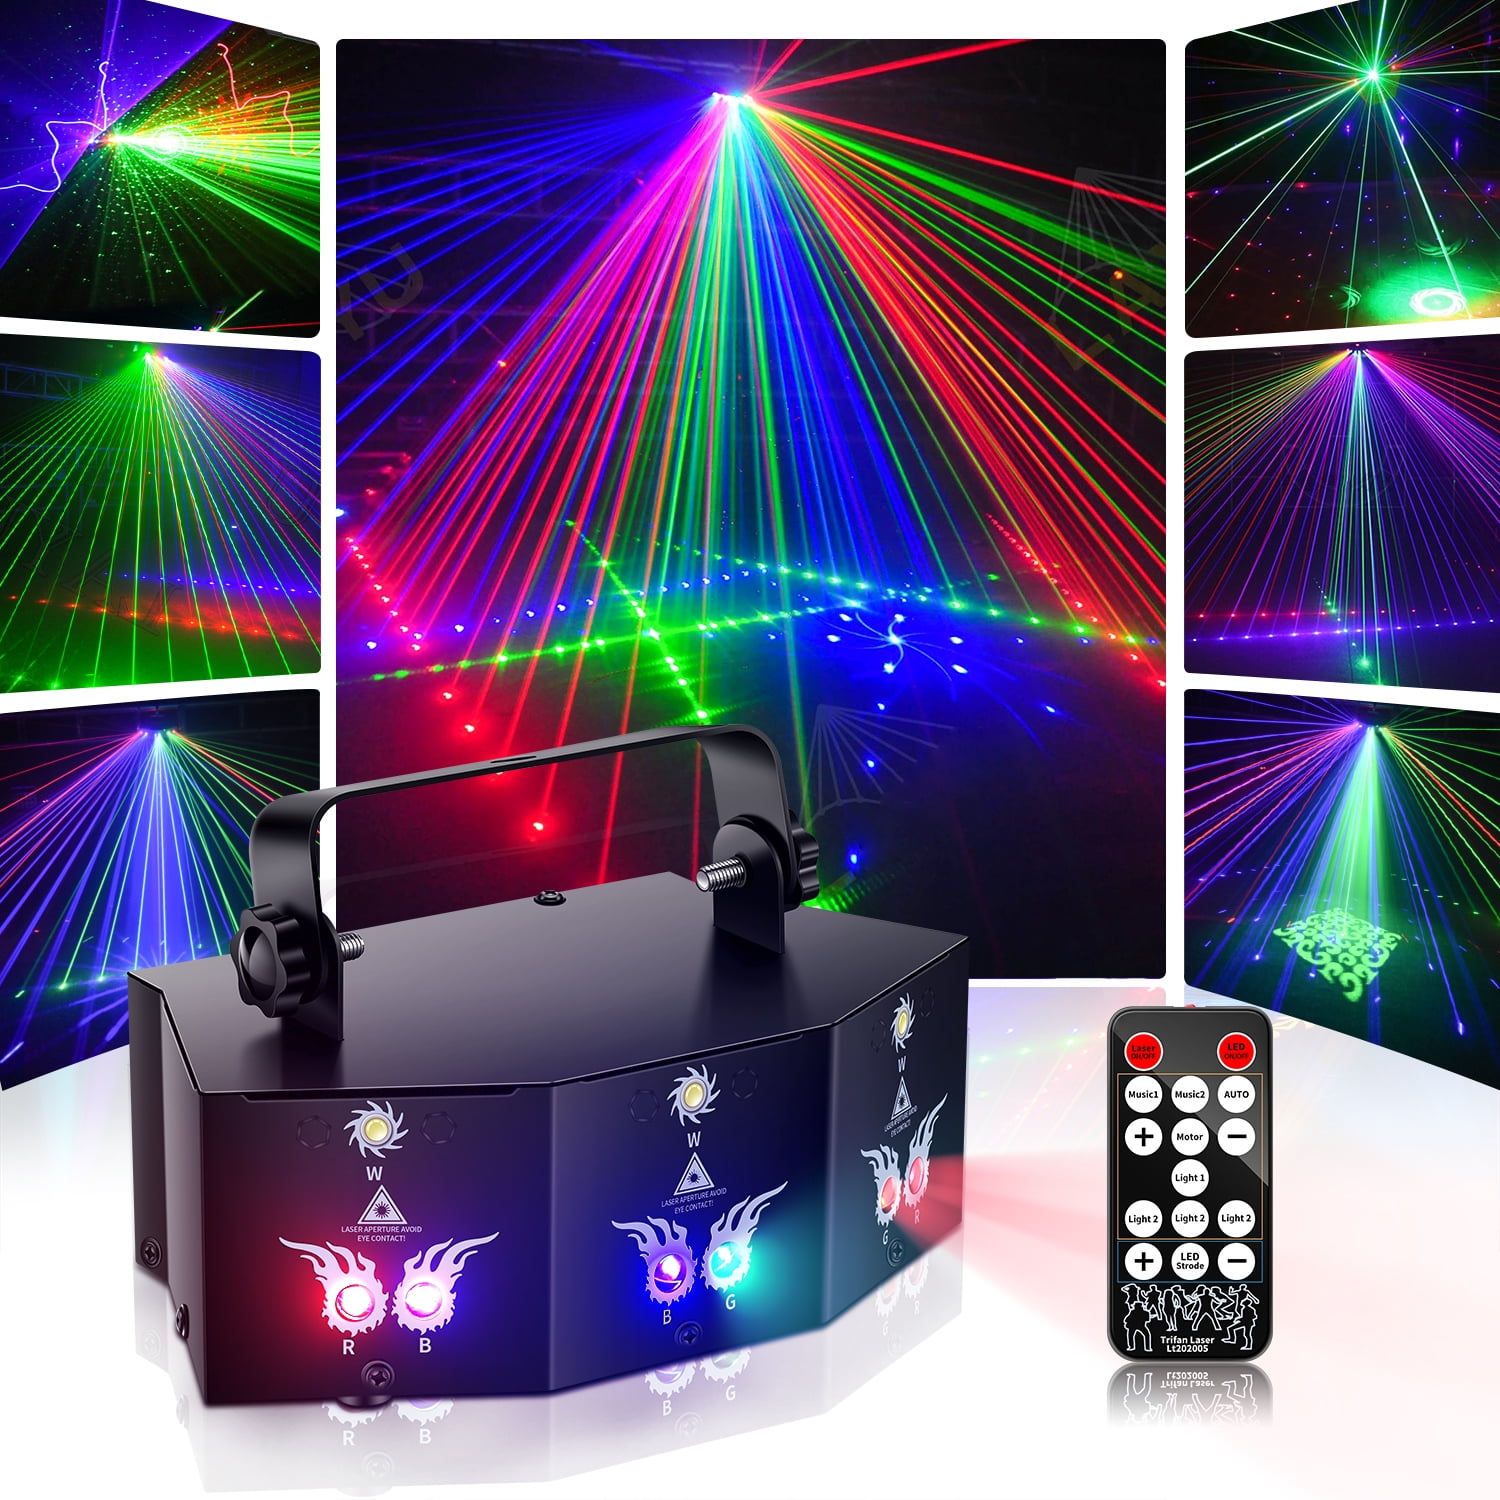 HOLDLAMP RGB Stage Laser Light 9 Lens DJ Disco Party Lights Sound Activated Strobe Light with Remote Control for Birthday Wedding Bar Dance Show, Size: Large